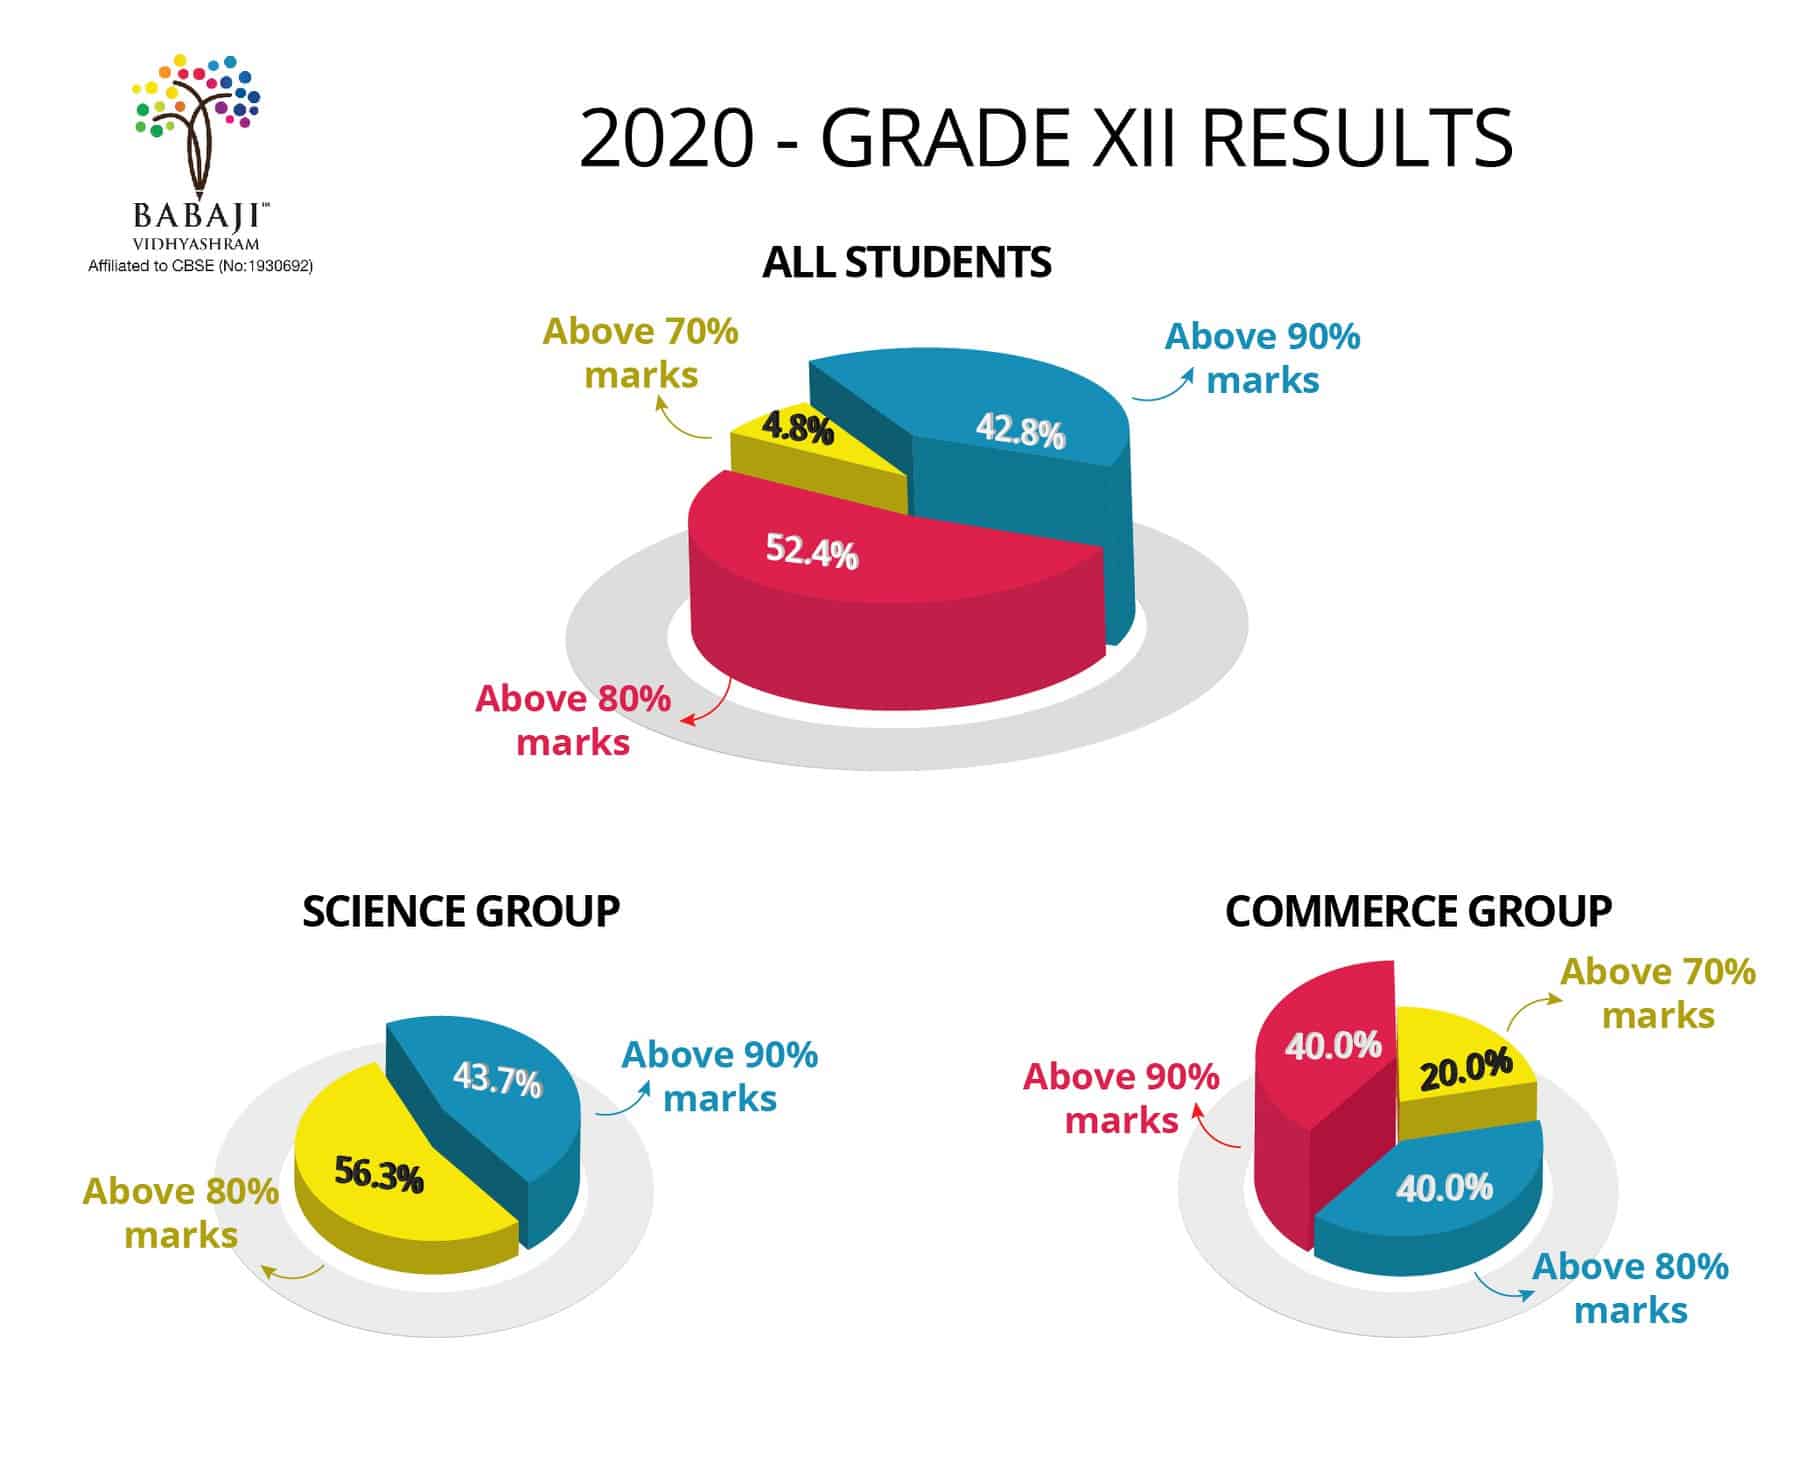 Infographics to explain 2020 grade 12 results of Babaji Vidyashram with all students - 42.8% scoring above 90%, 52.4% scoring above 80% and 4.8%, above 70% in 3D pie chart placed centre top